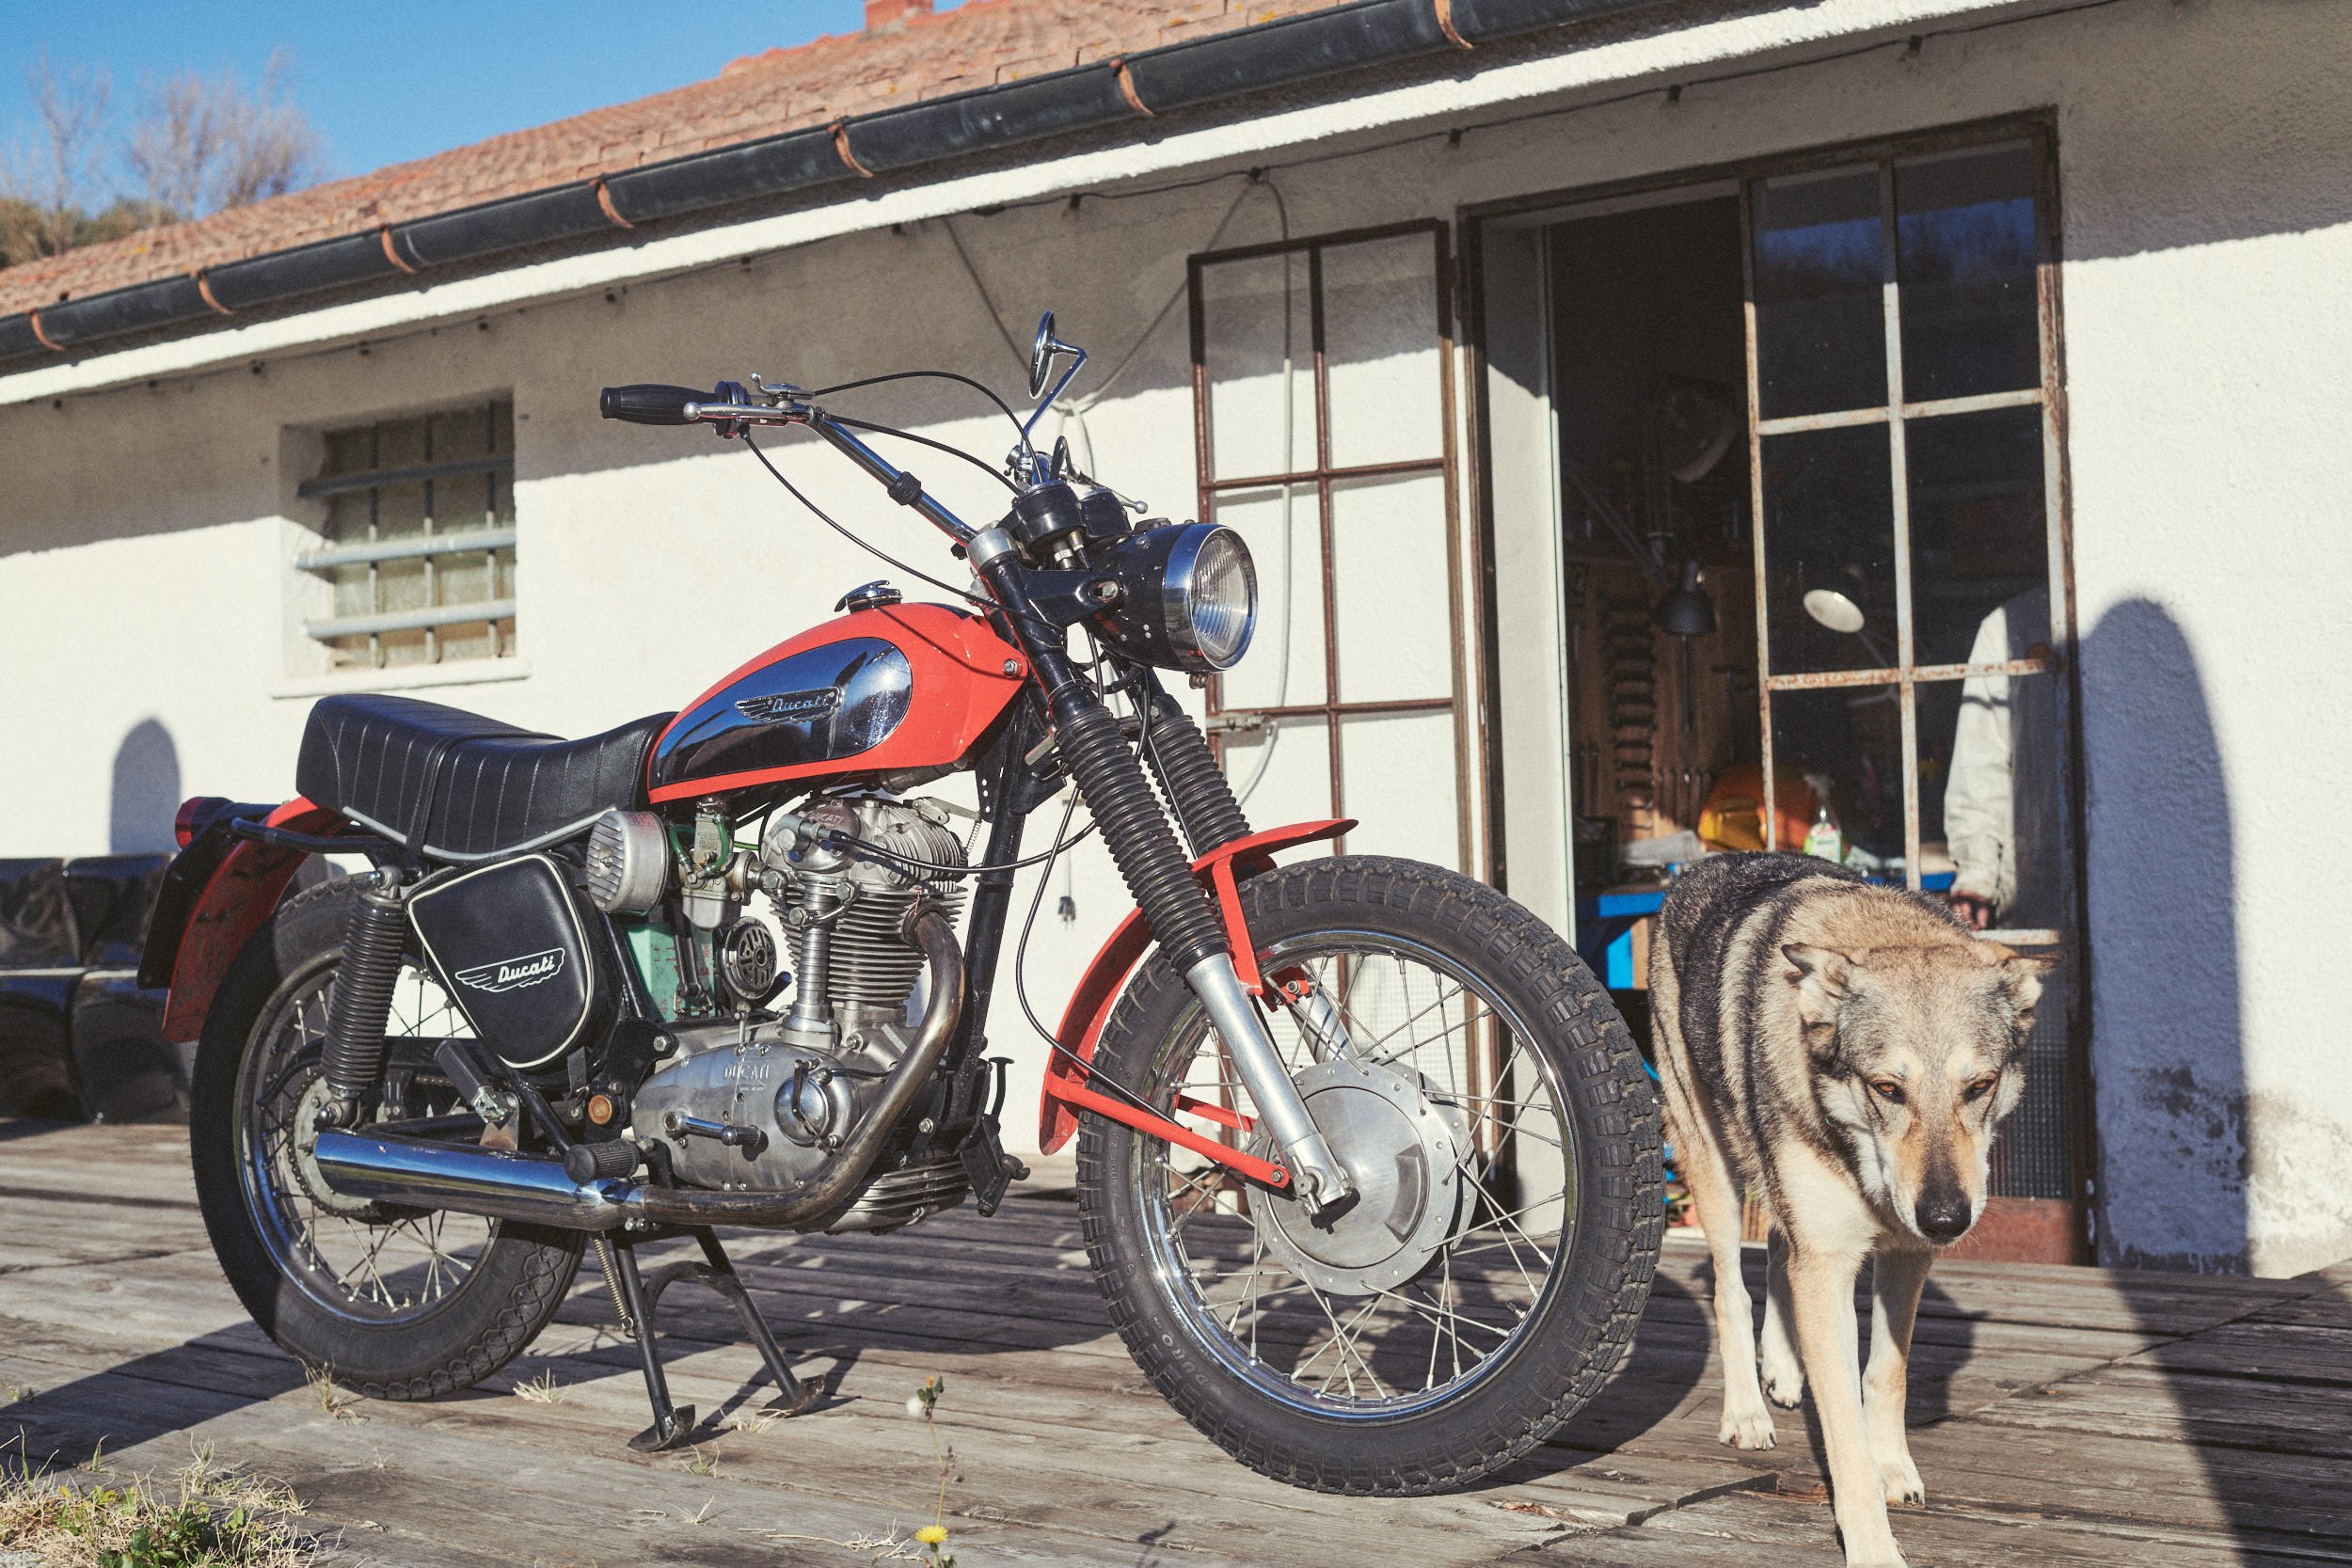 Mia the wolfdog and the Ducati